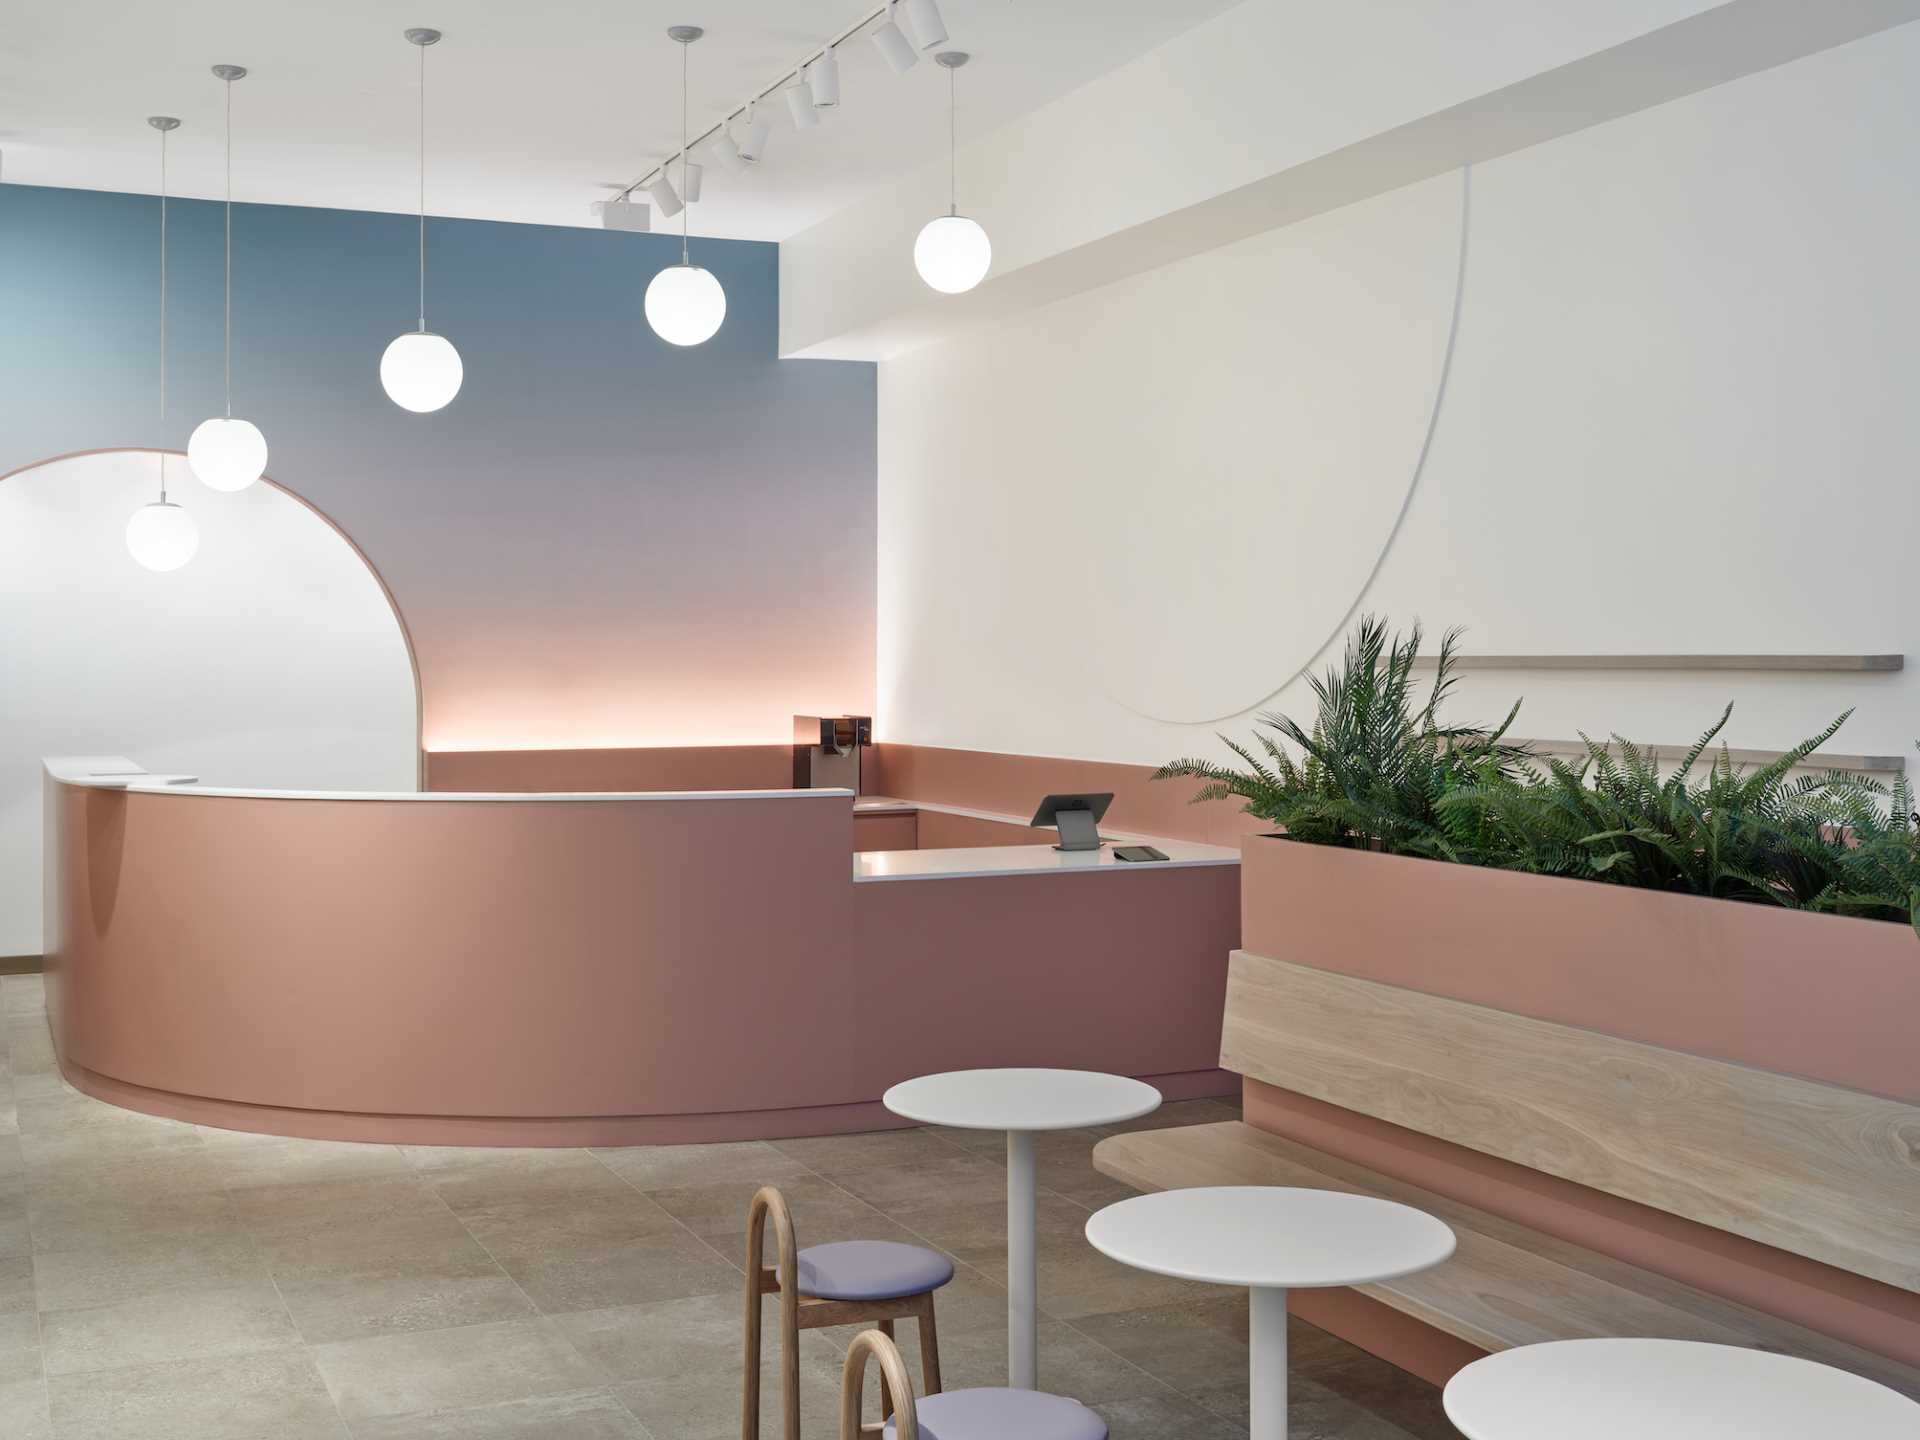 A modern cafe with a calm and relaxed atmosphere, a colorful feature wall. and curved designs.